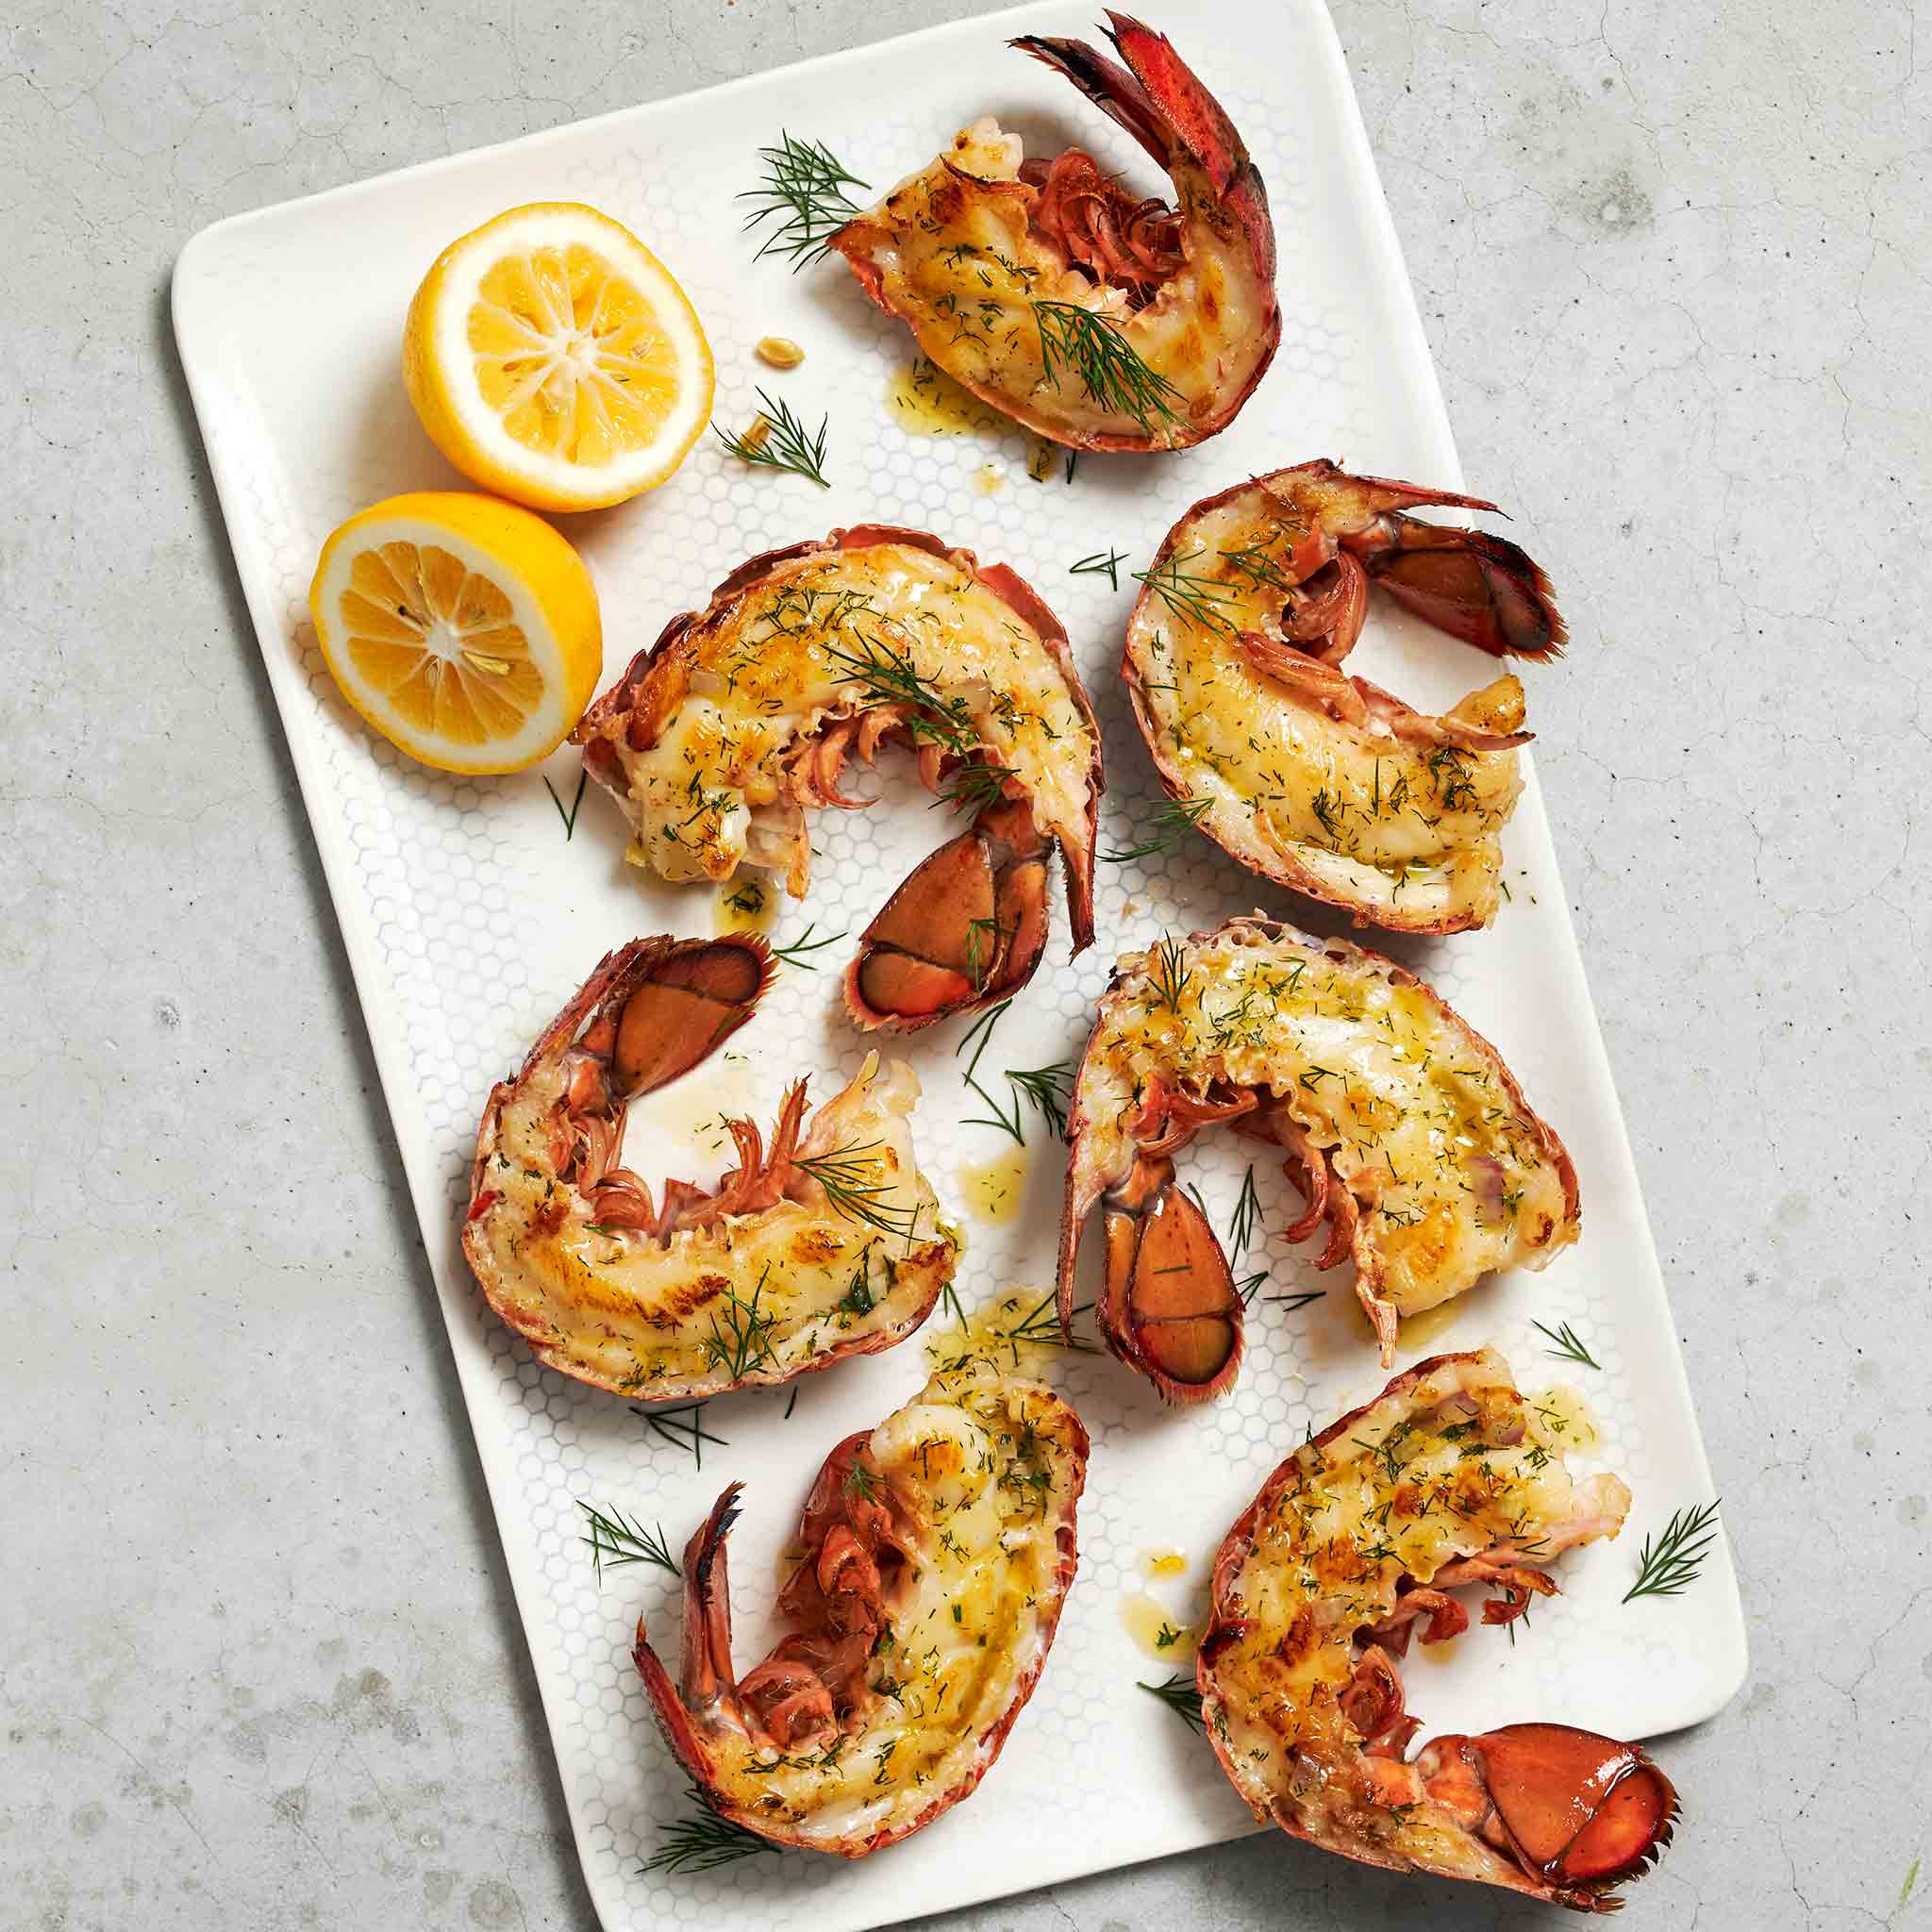 6058 WF PLATED Grilled Lobster Tails Seafood